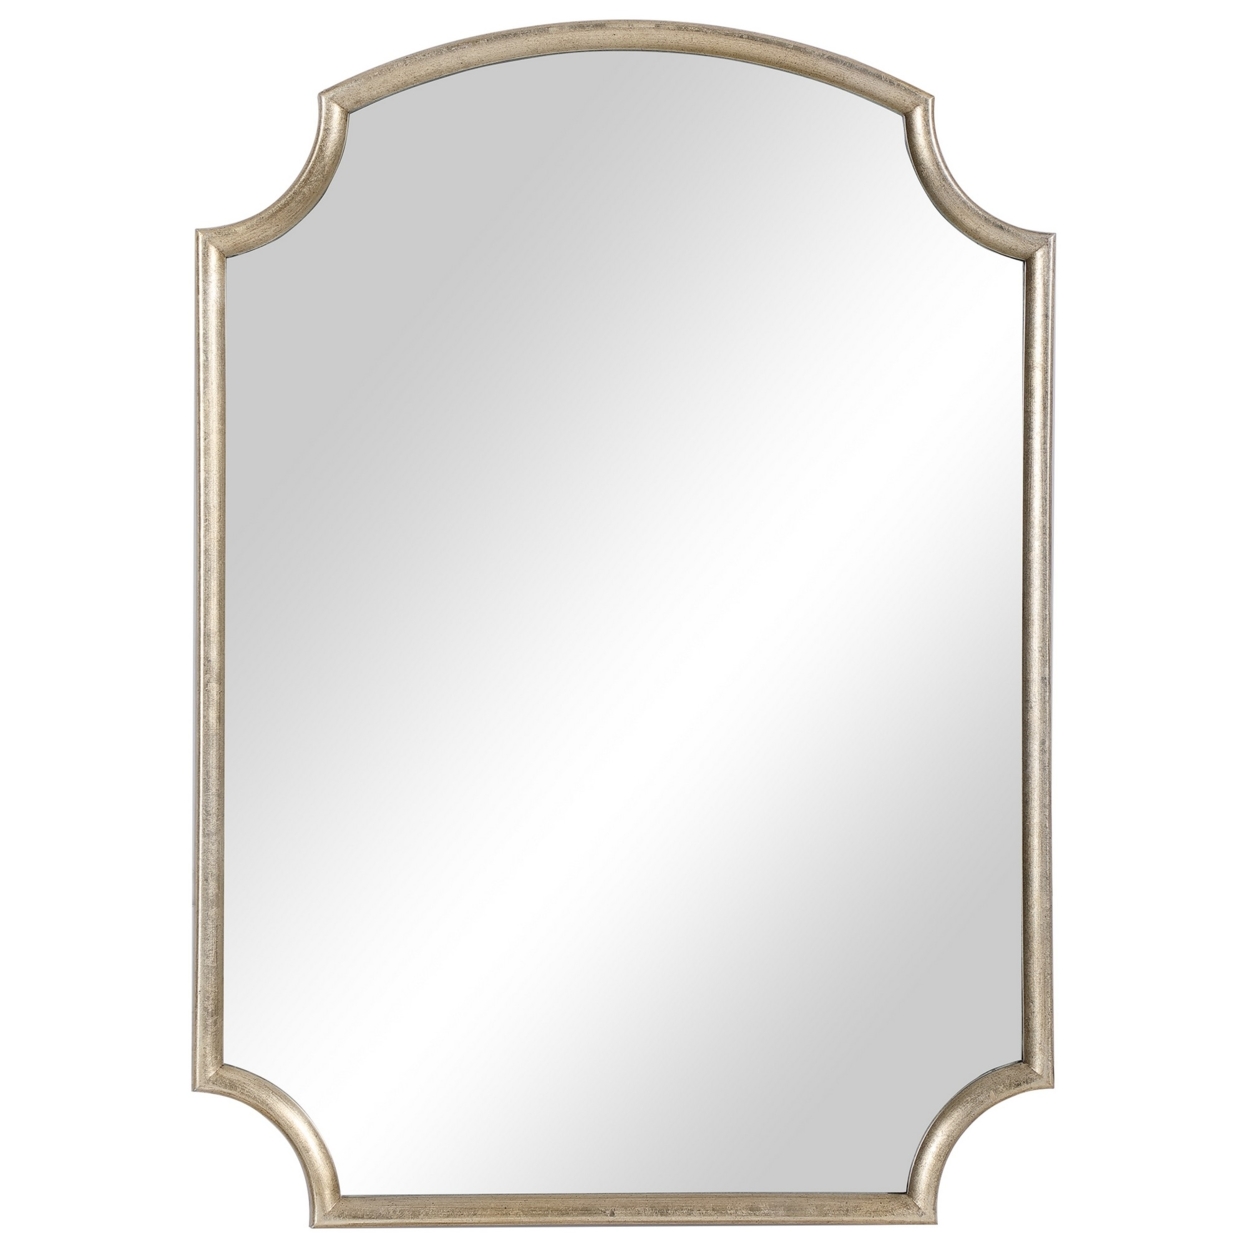 28 Inches Arched Top Accent Mirror With Concave Corners, Gold- Saltoro Sherpi